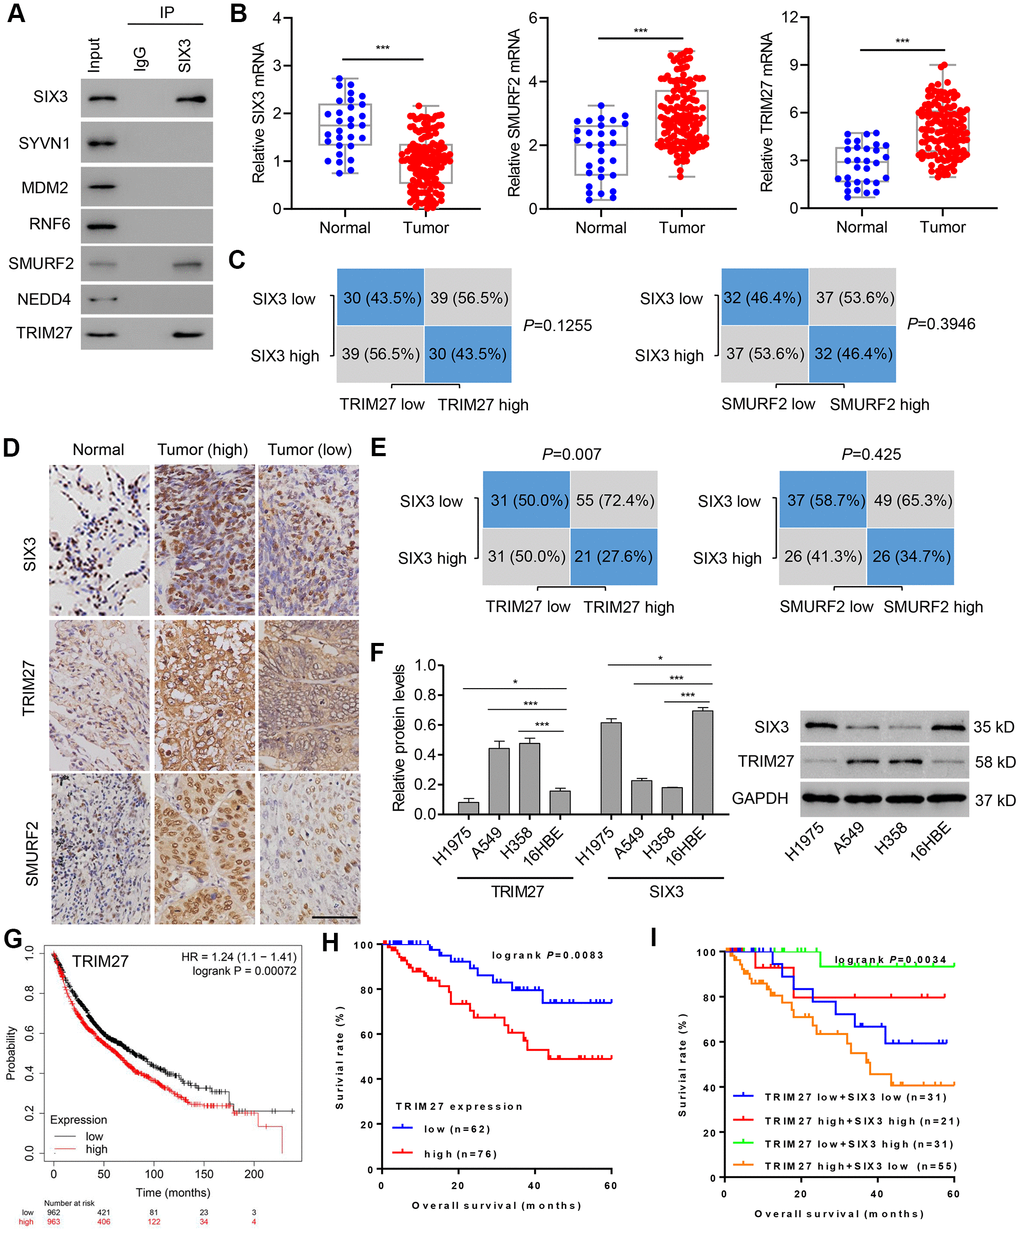 TRIM27 and SIX3 expression levels and correlation analysis in lung cancer cells and tissues. (A) A549 cell lysates underwent co-immunoprecipitation with anti-SIX3 or control IgG antibody. The immunoprecipitates were then immunoblotted with the indicated antibodies. TRIM27, SMURF2, and SIX3 expression in lung cancer tissues (n = 138) and adjacent normal lung tissues (n = 30) in our independent hospital cohort was detected by quantitative real-time PCR (B) and immunohistochemistry (D). (C, E) Correlation analysis of SIX3, SMURF2, and TRIM27 in lung cancer tissues (n = 138). Statistical analyses were performed using the Chi-square test. (F) TRIM27 and SIX3 expression in cells from the NSCLC cell lines H1975, A549, and H358, and the human bronchial epithelial cell line 16HBE were measured by western blot analysis. Survival probability of patients with lung cancer from a Kaplan-Meier Plotter database (G) and our independent hospital cohort (H, I). Scale bar: 50 μm. All experiments were repeated at least three times, and data are represented as mean ± SD. (B) ***P F) *P P 